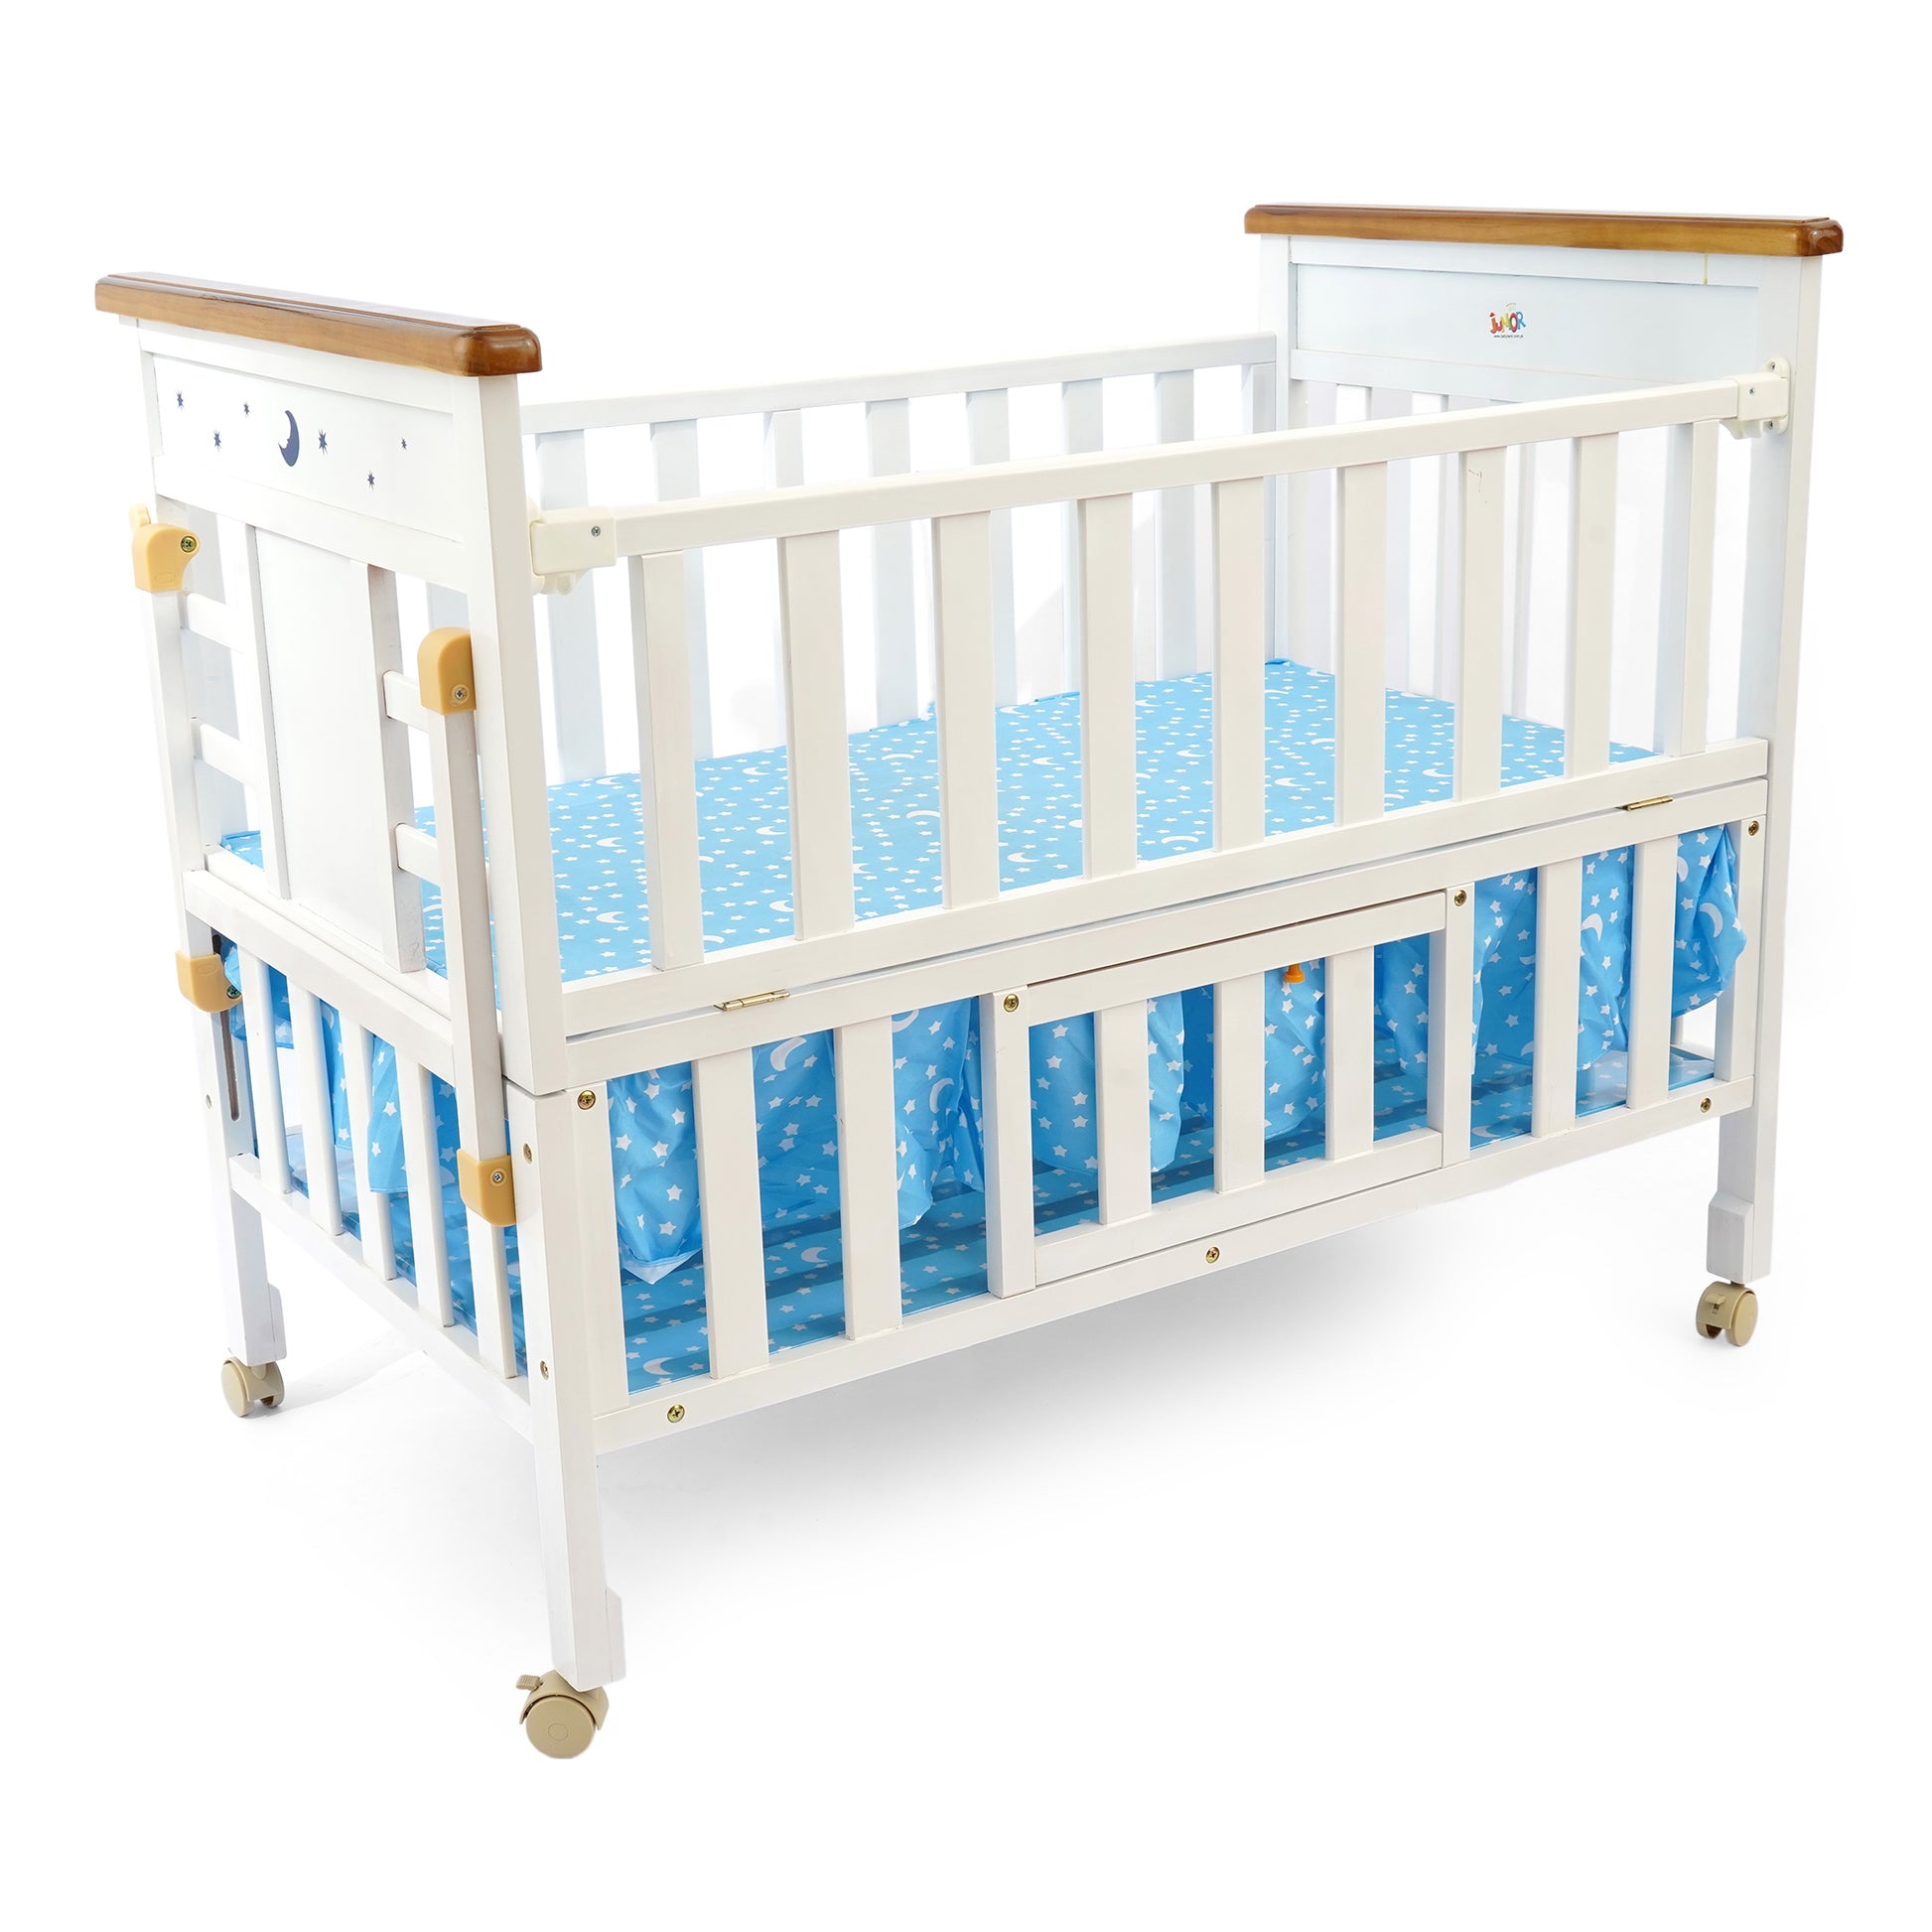 Junior Baby Cot with Crown